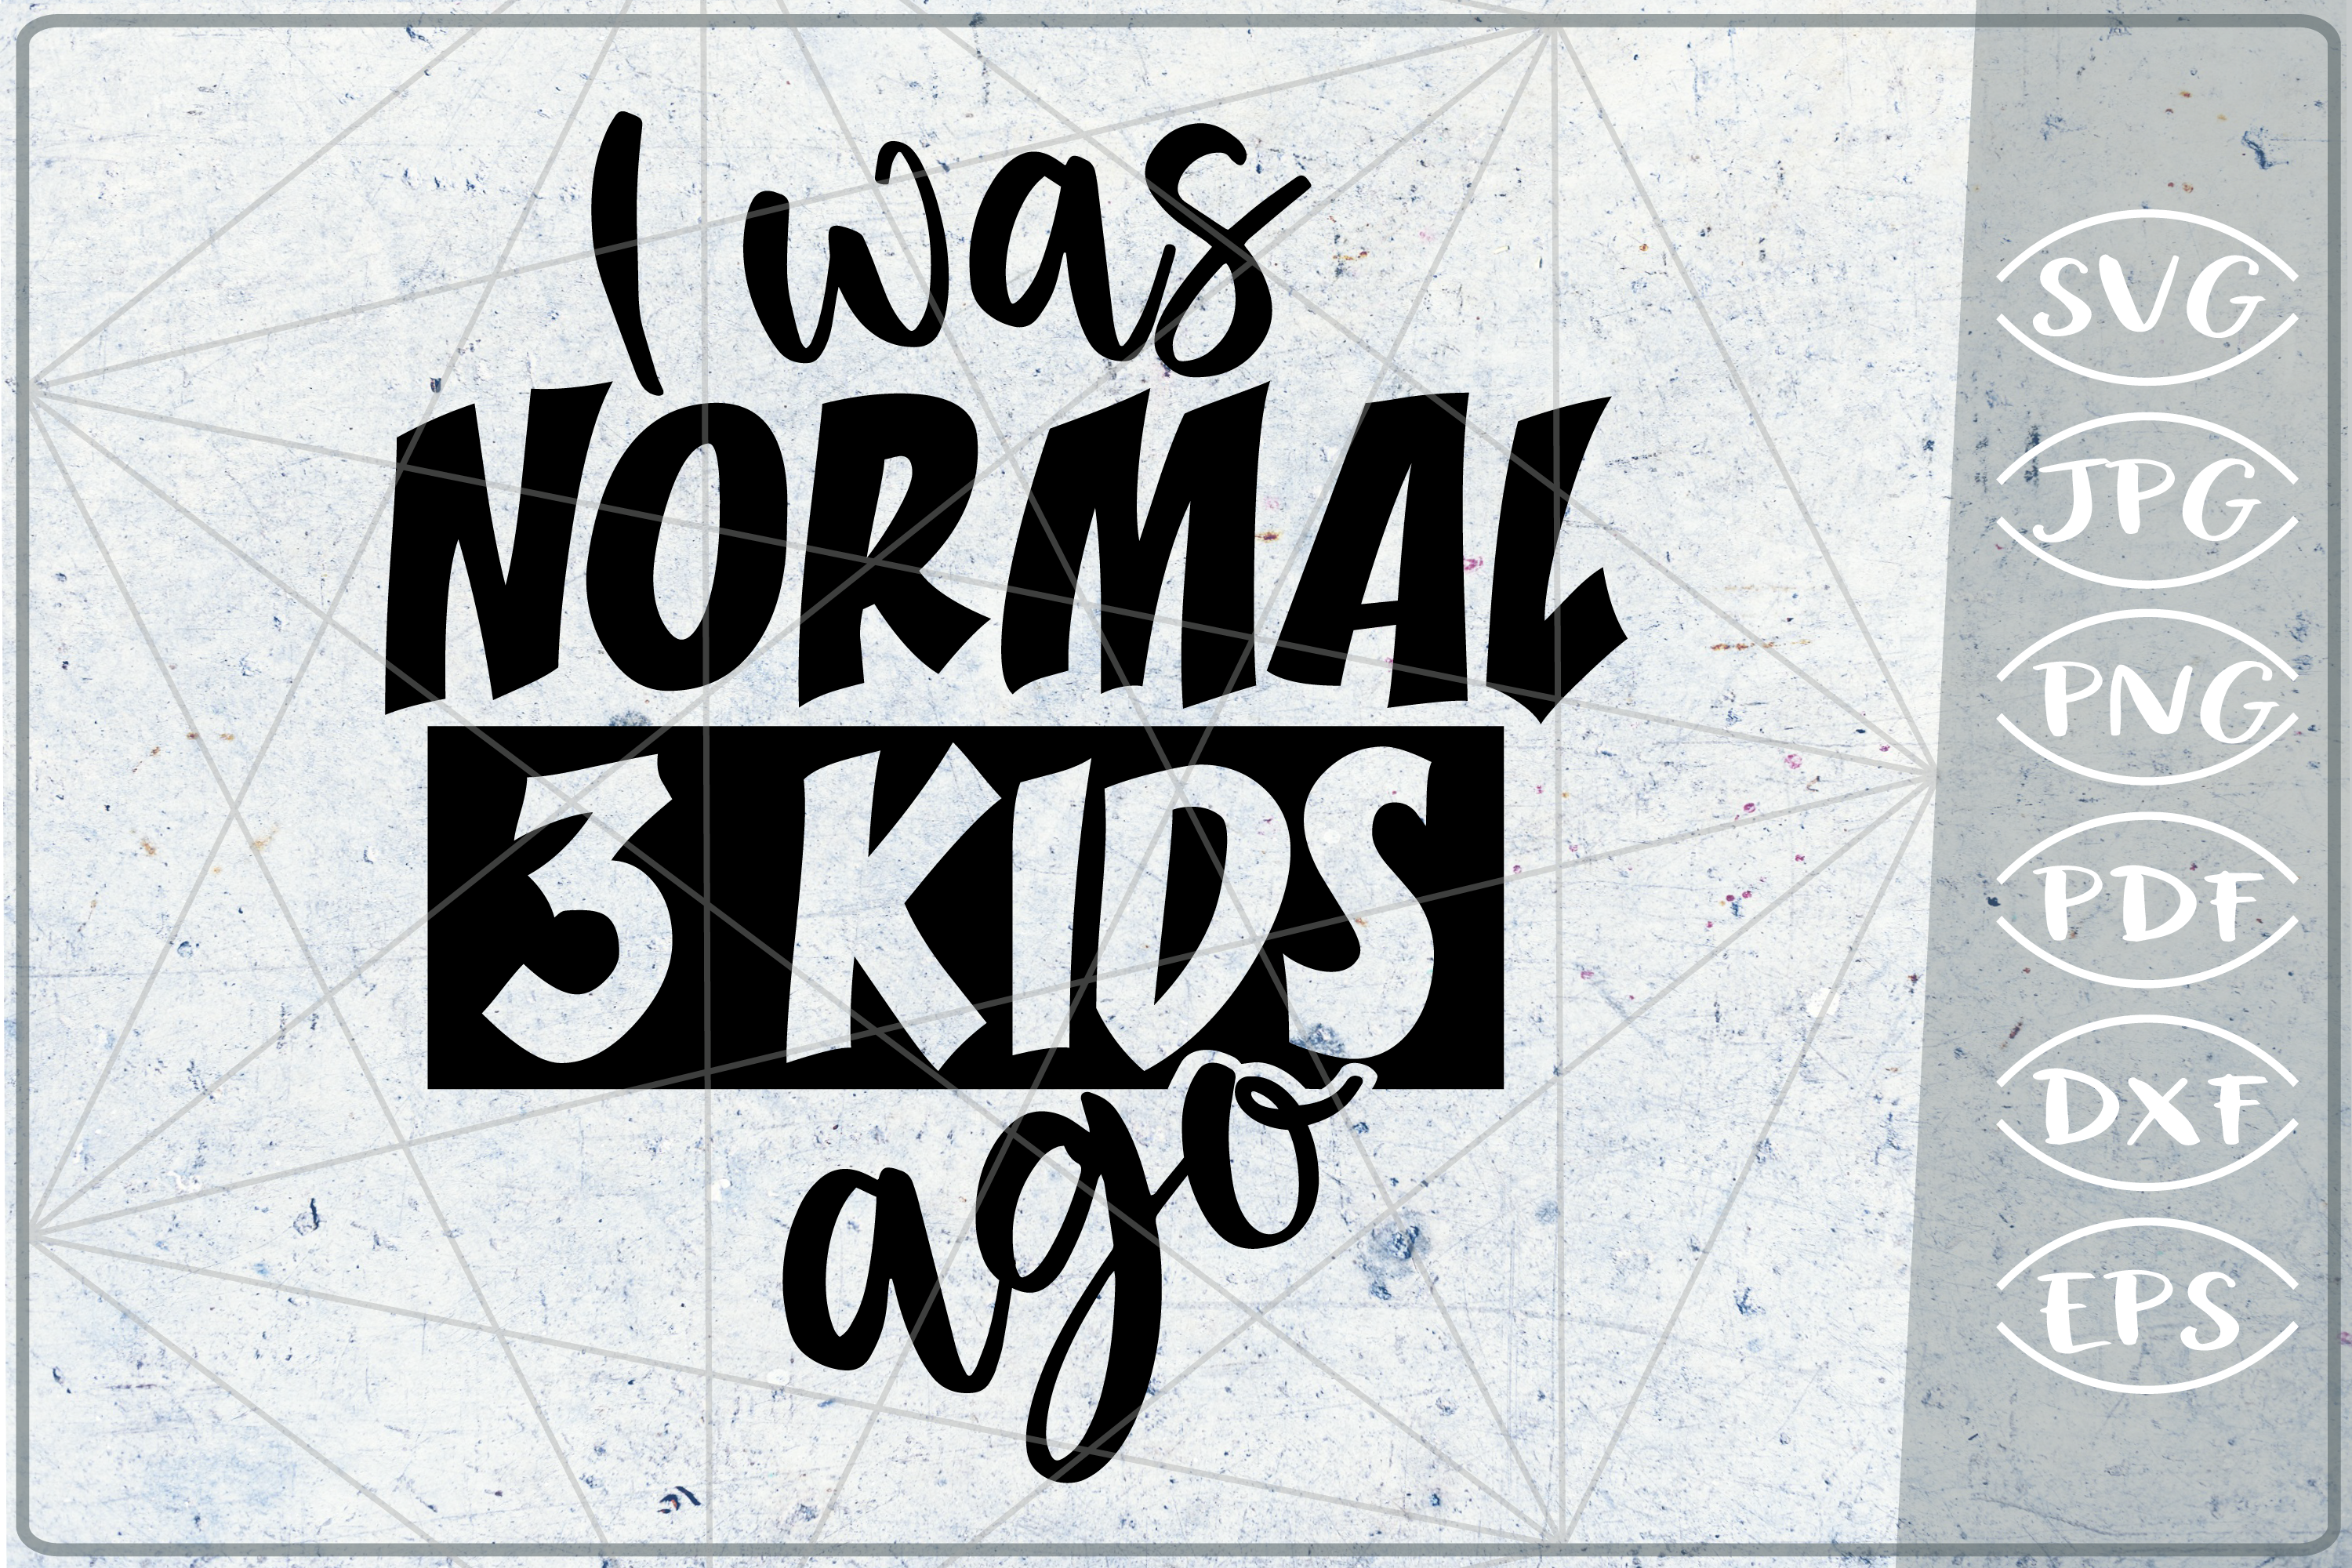 I Was Normal 3 Kids Ago SVG Cutting File - Mom Life (249575) | Cut